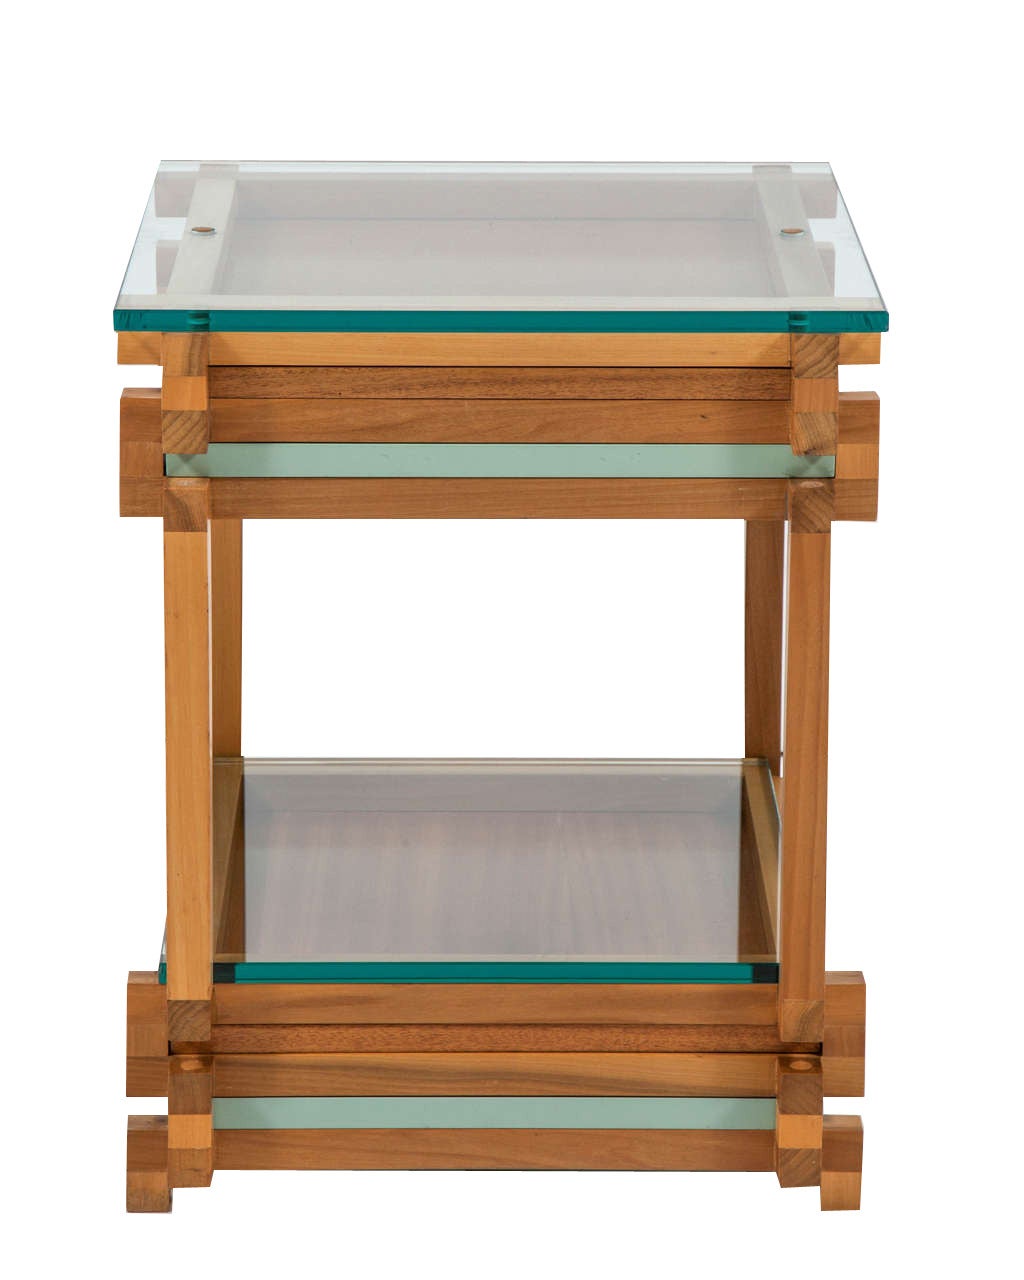 Architectural glass top puzzle table with pull-out lacquered trays, all original finish and glass.